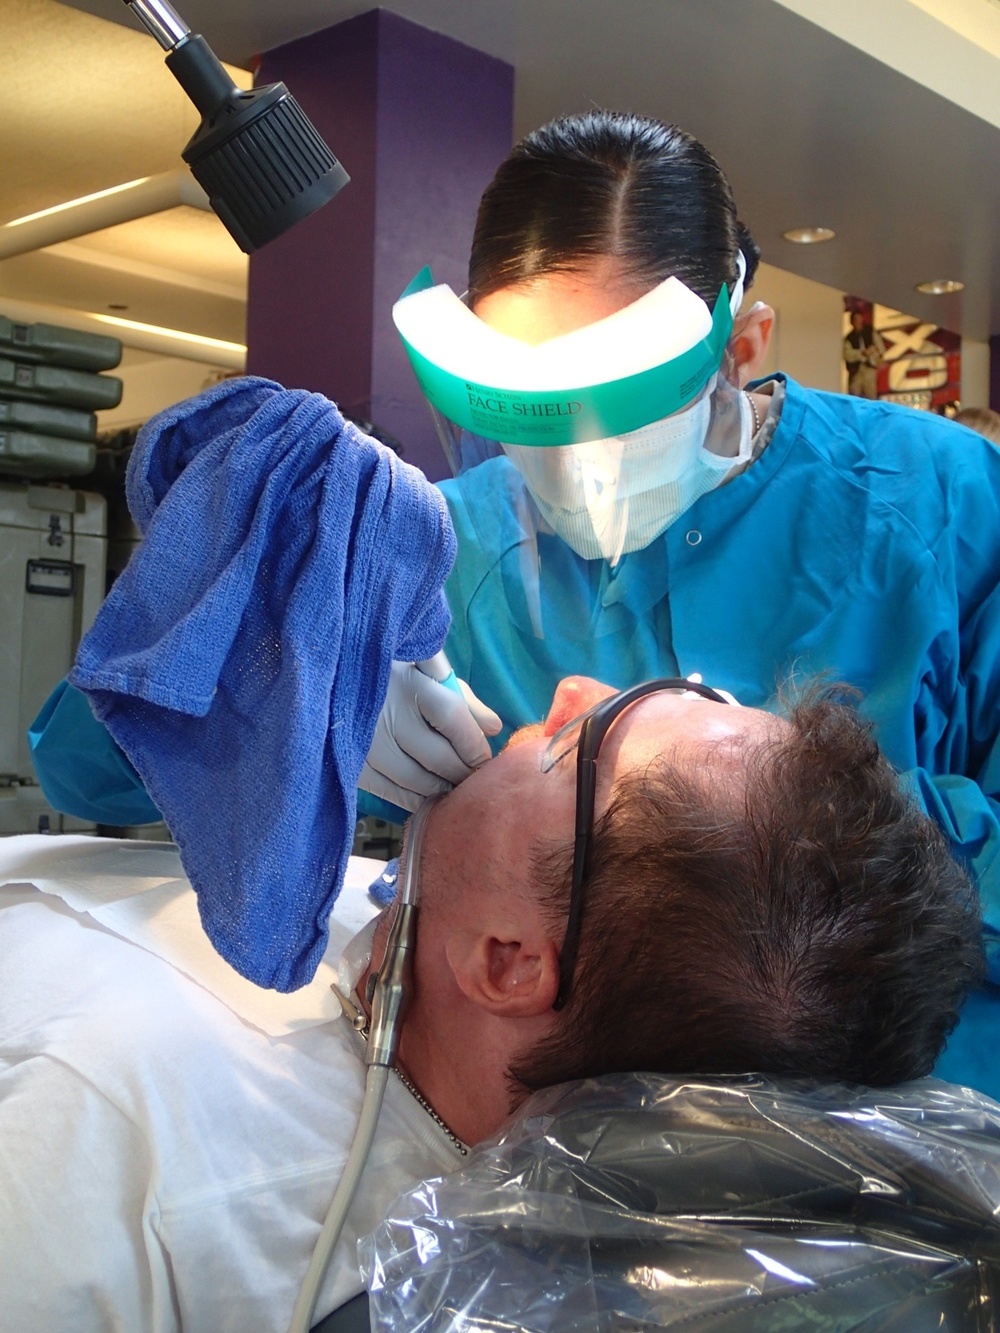 Service members provide dental care during the IRT event in Norwich, N.Y.